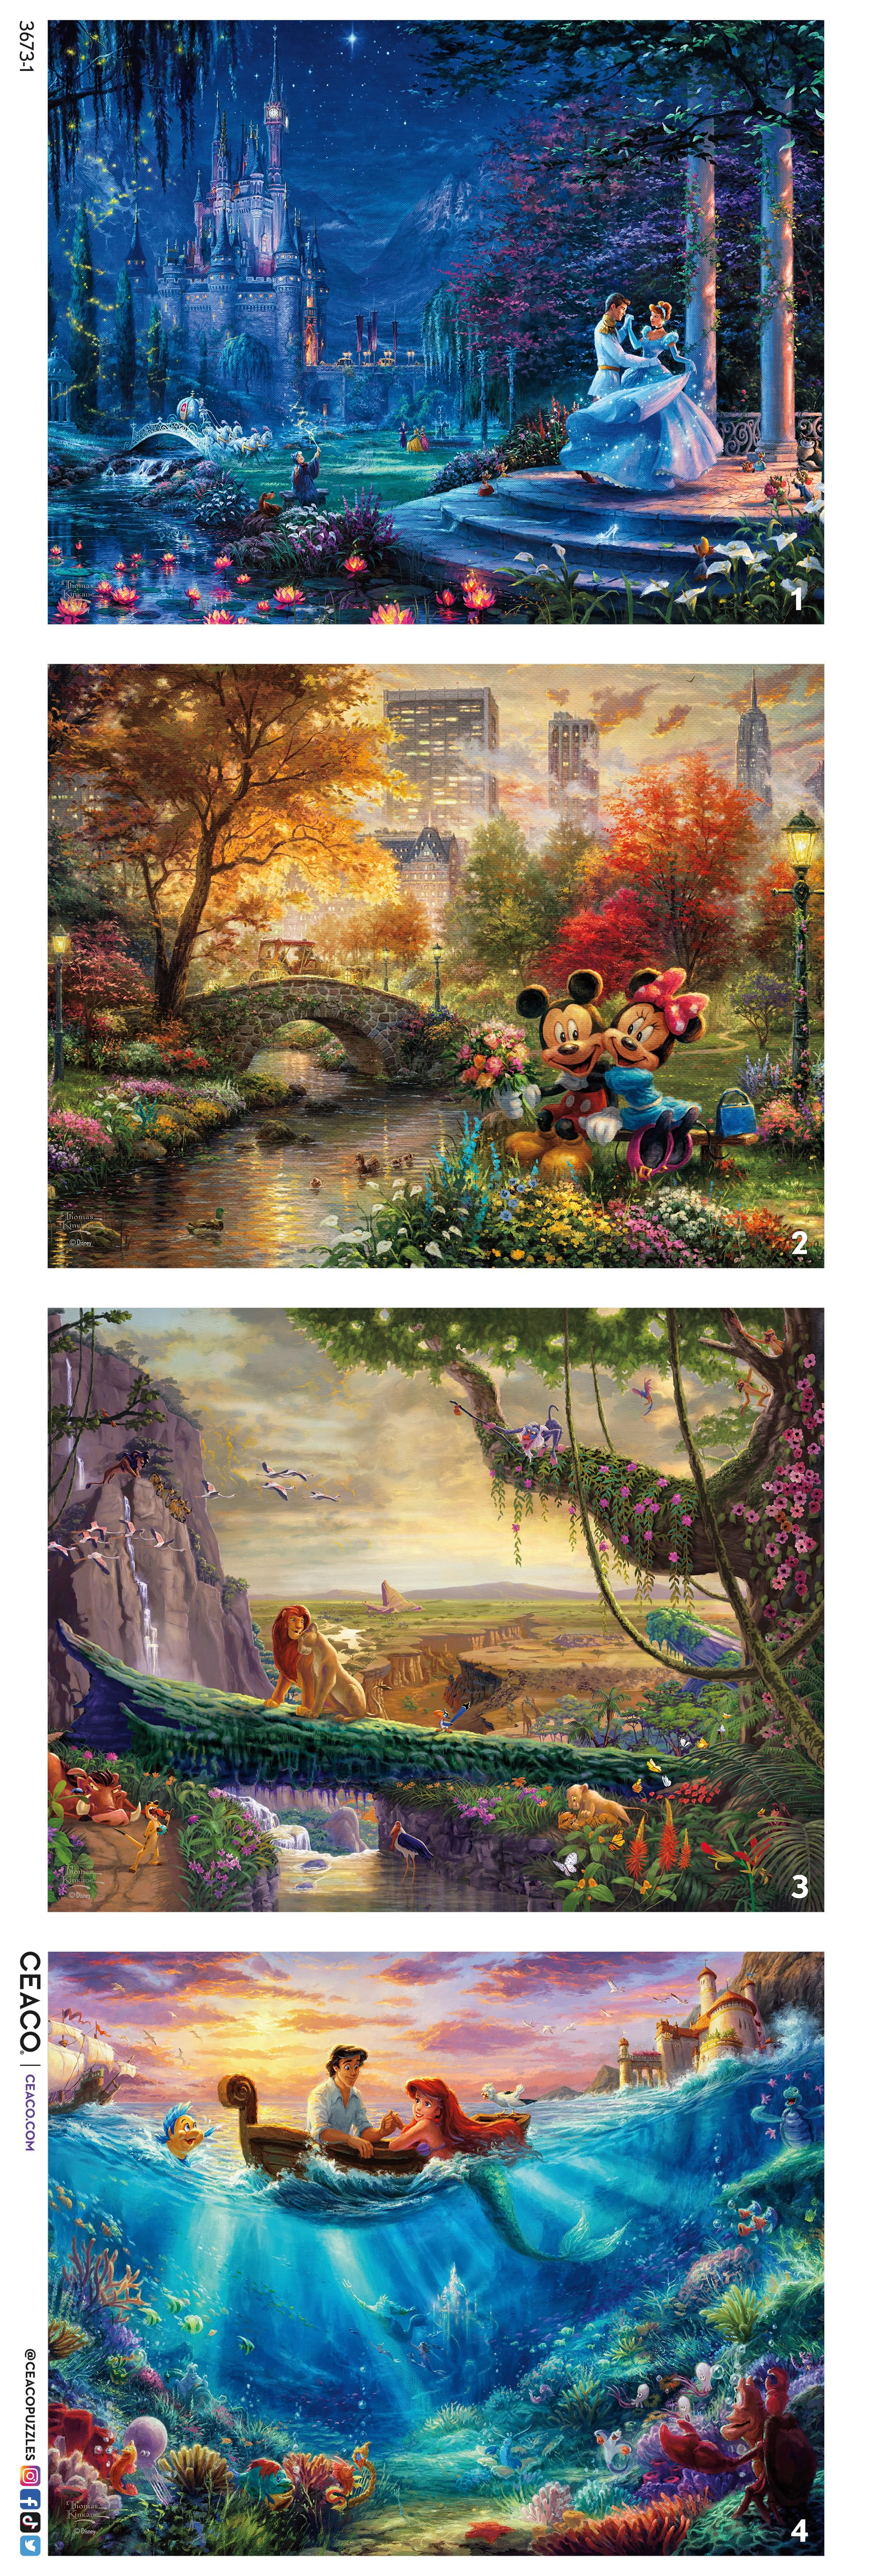  Ceaco - 4 in 1 Multipack - Thomas Kinkade - Disney Dreams  Collection - Aladdin, Winnie the Pooh, Beauty & the Beast, & The Little  Mermaid - (4) 500 Piece Jigsaw Puzzles : Toys & Games